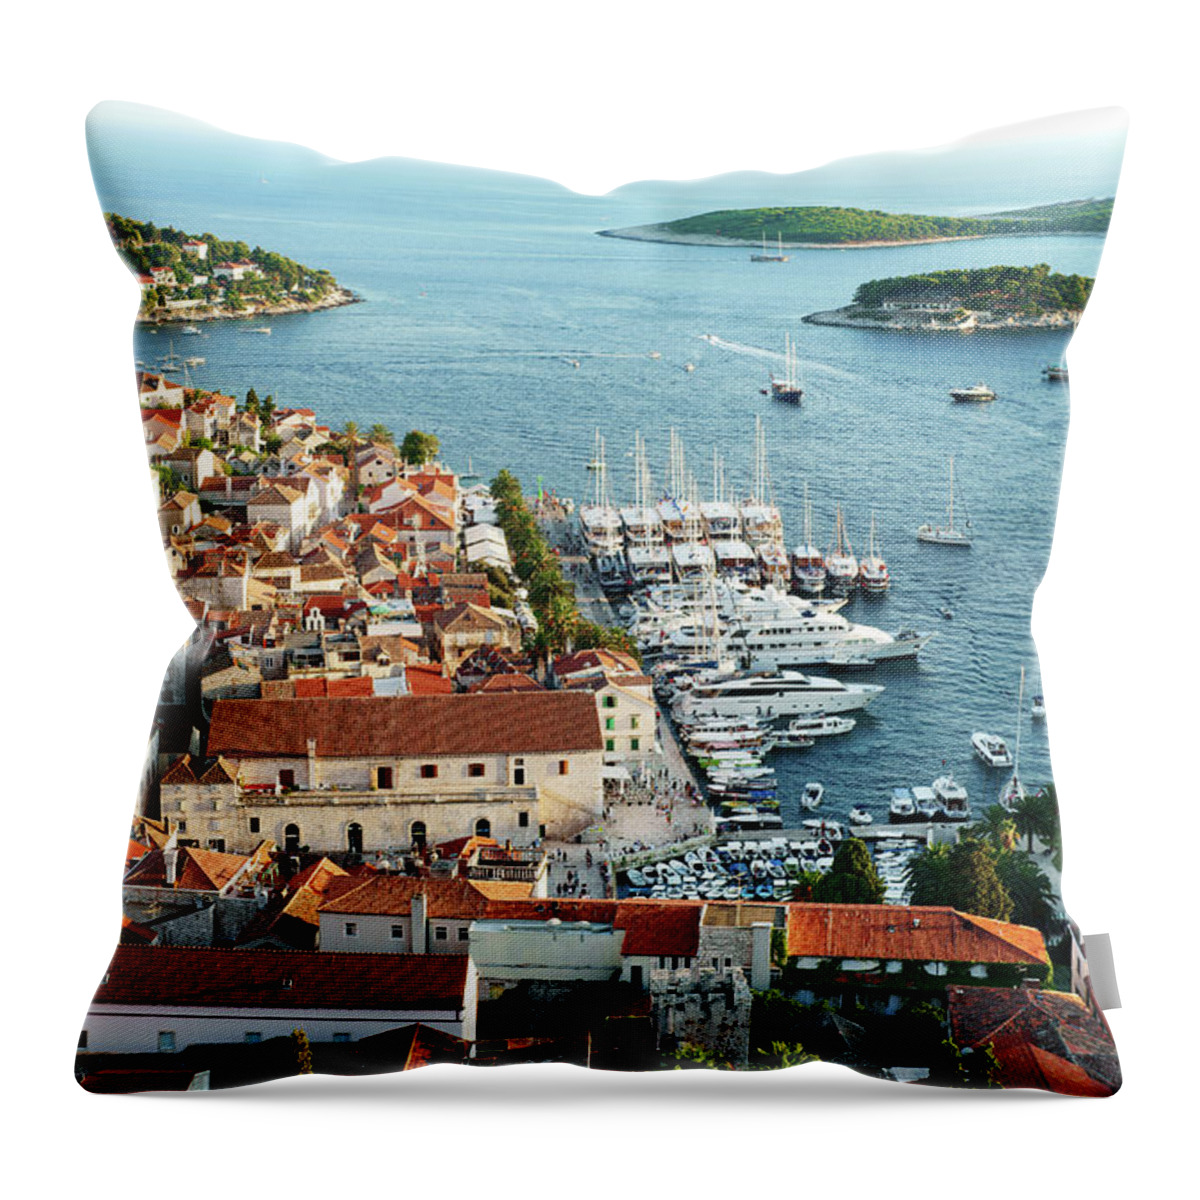 Water's Edge Throw Pillow featuring the photograph Hvar by Ziva k